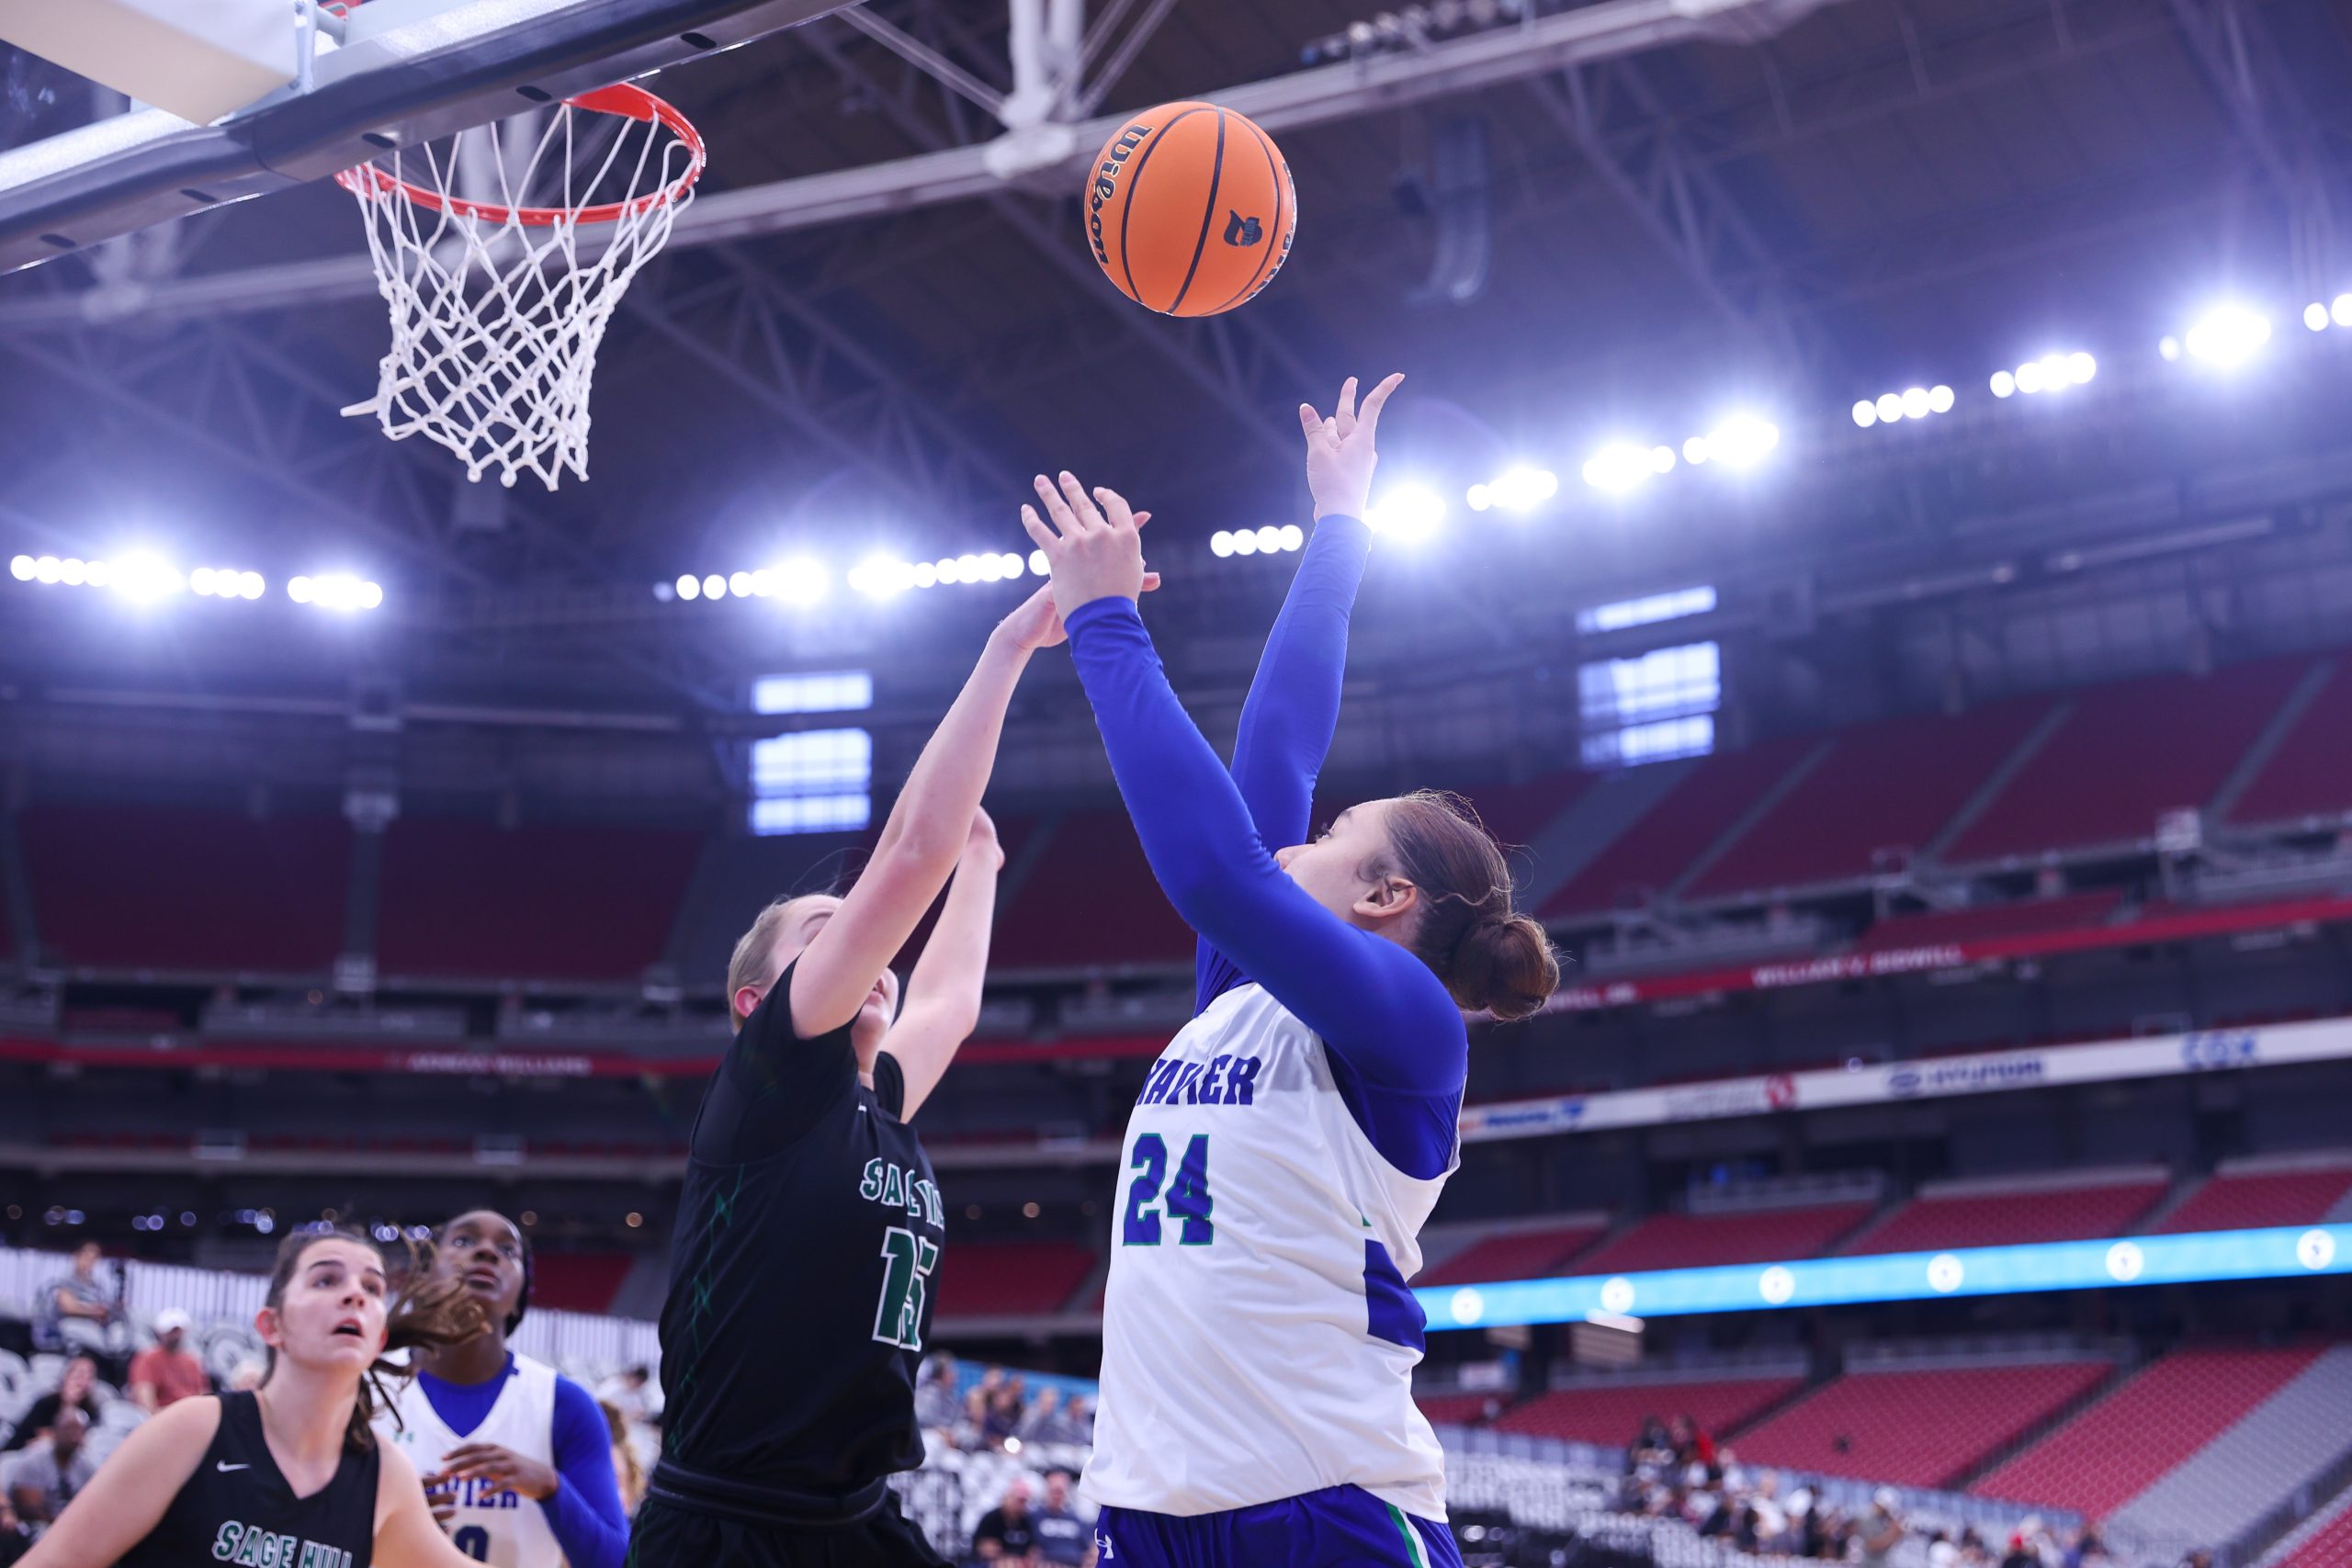 The girls bracket of the Section 7 Tournament featured 136 teams from across the country. The boys will close out the two-week basketball showcase Sunday. (Photo by Joey Plishka/Cronkite News)